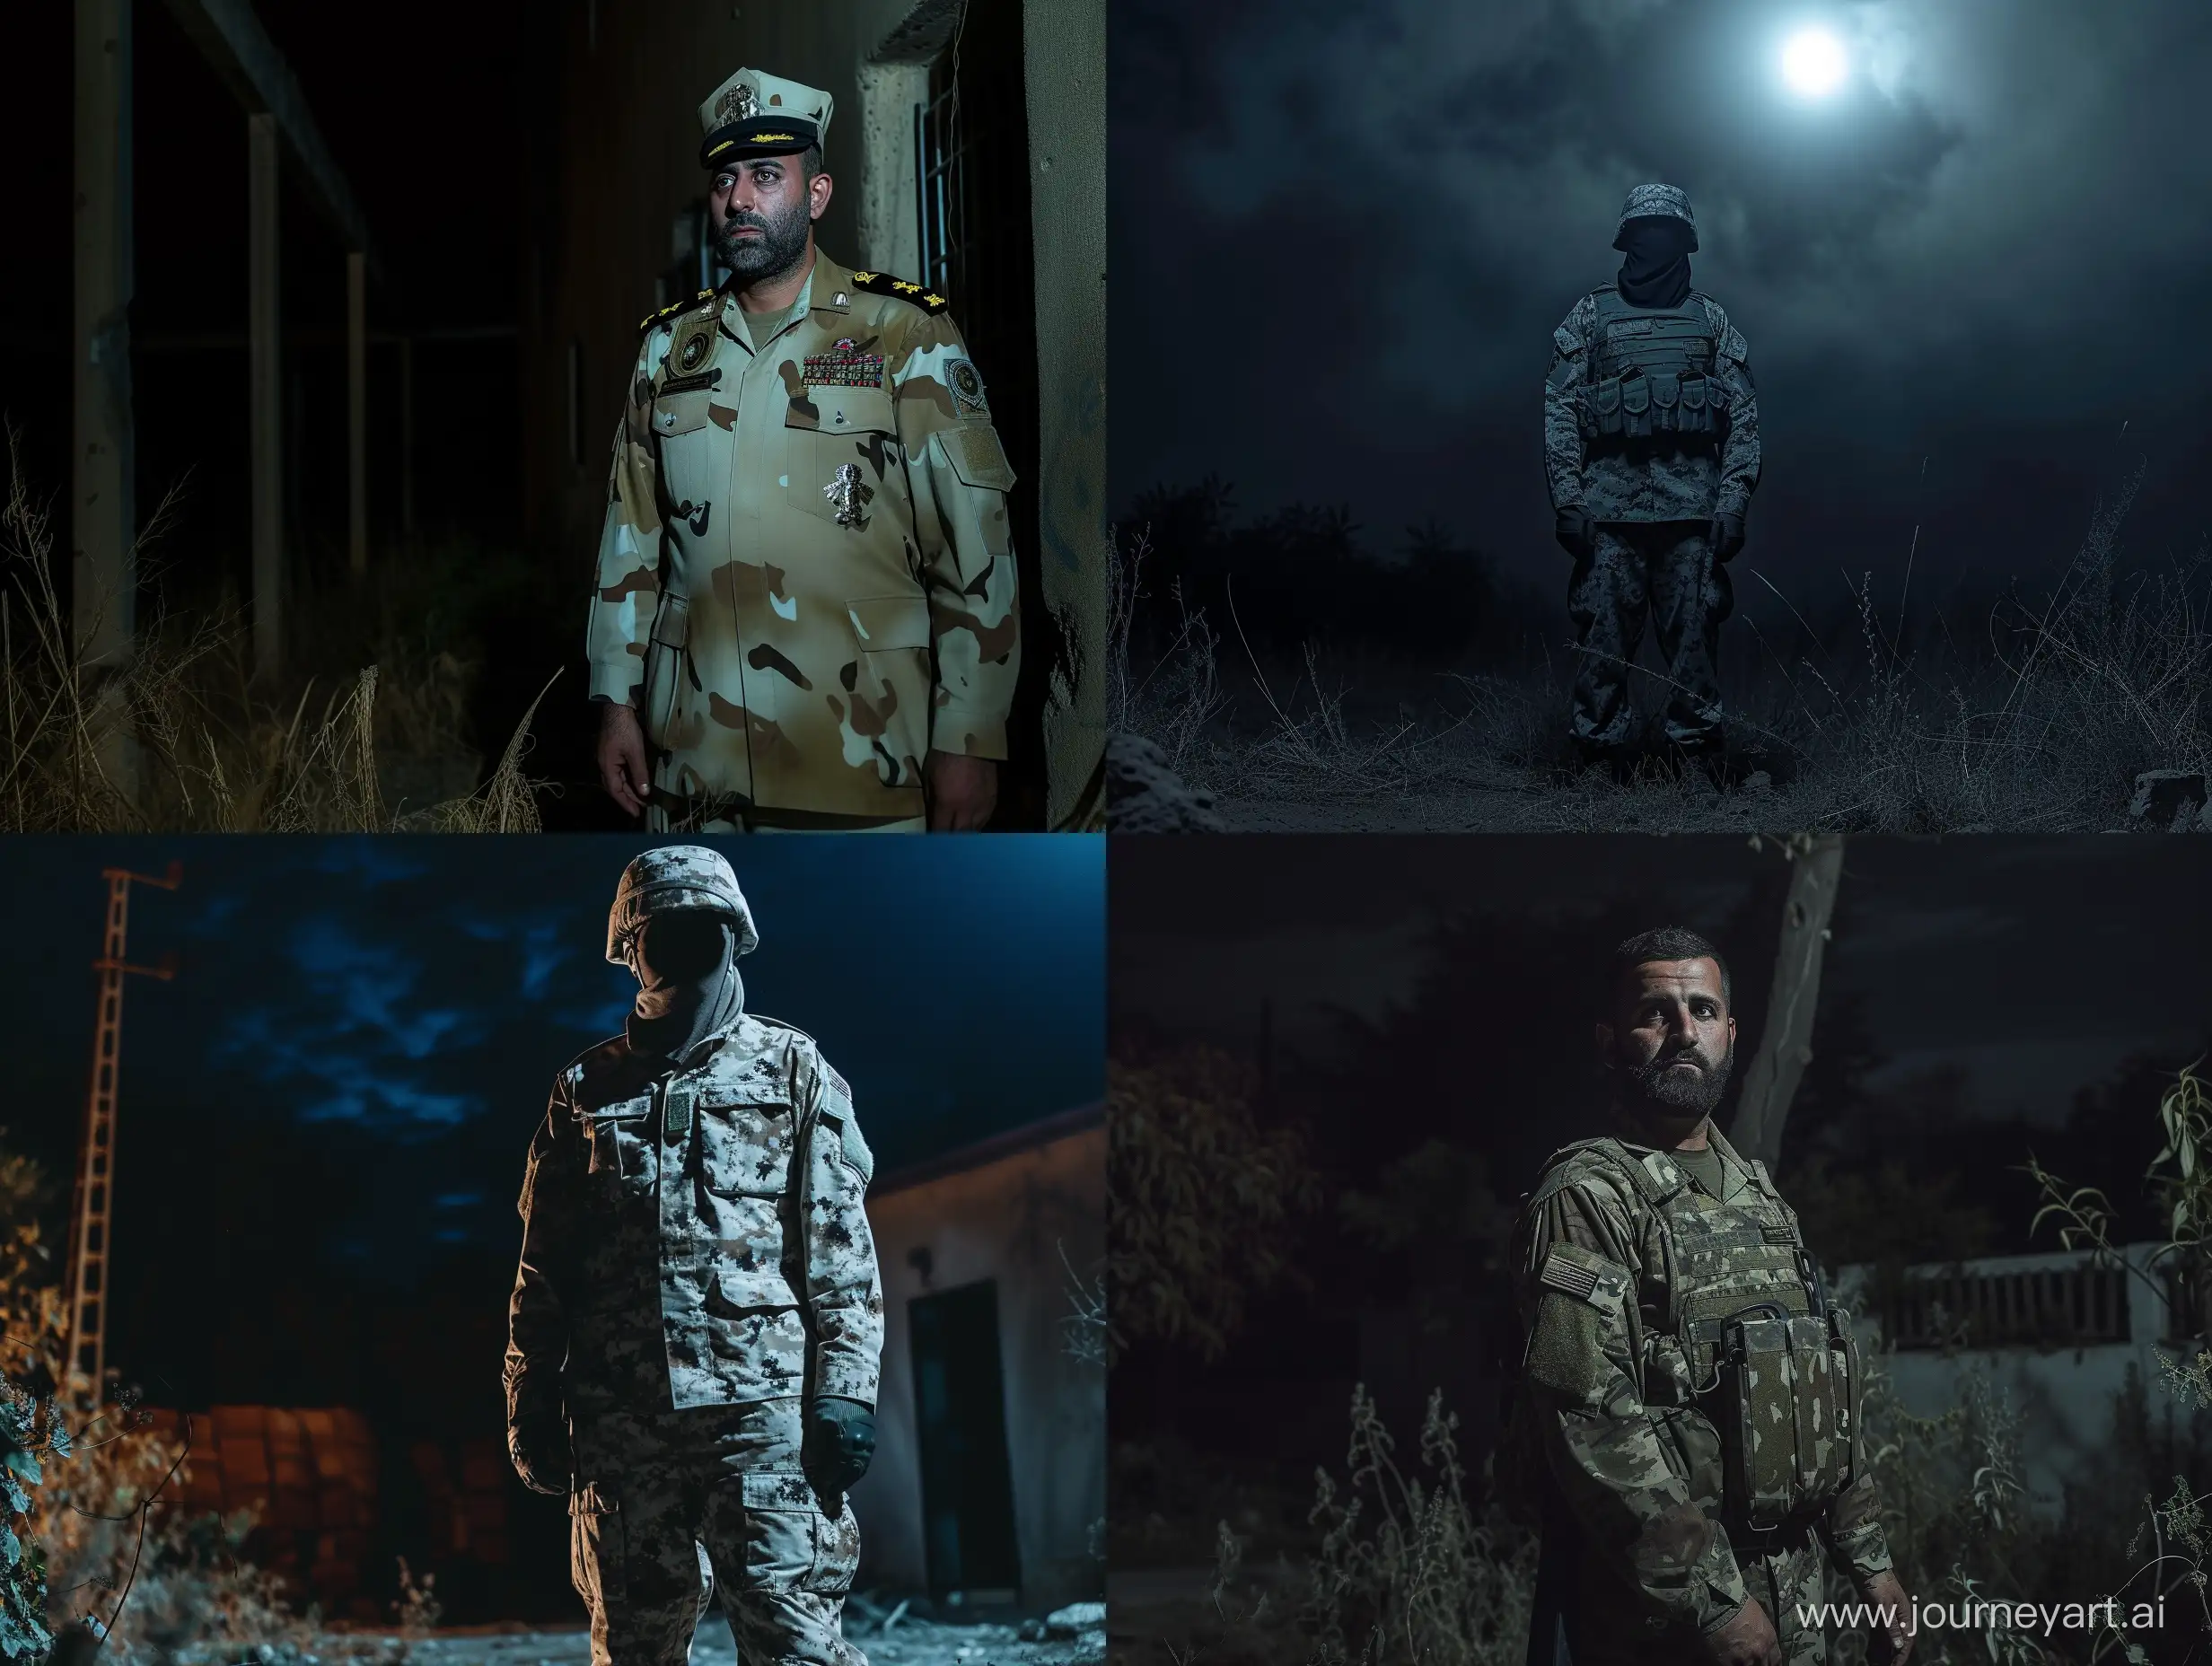 Iranian-Soldier-Encounters-Ghosts-in-Detailed-Night-Scene